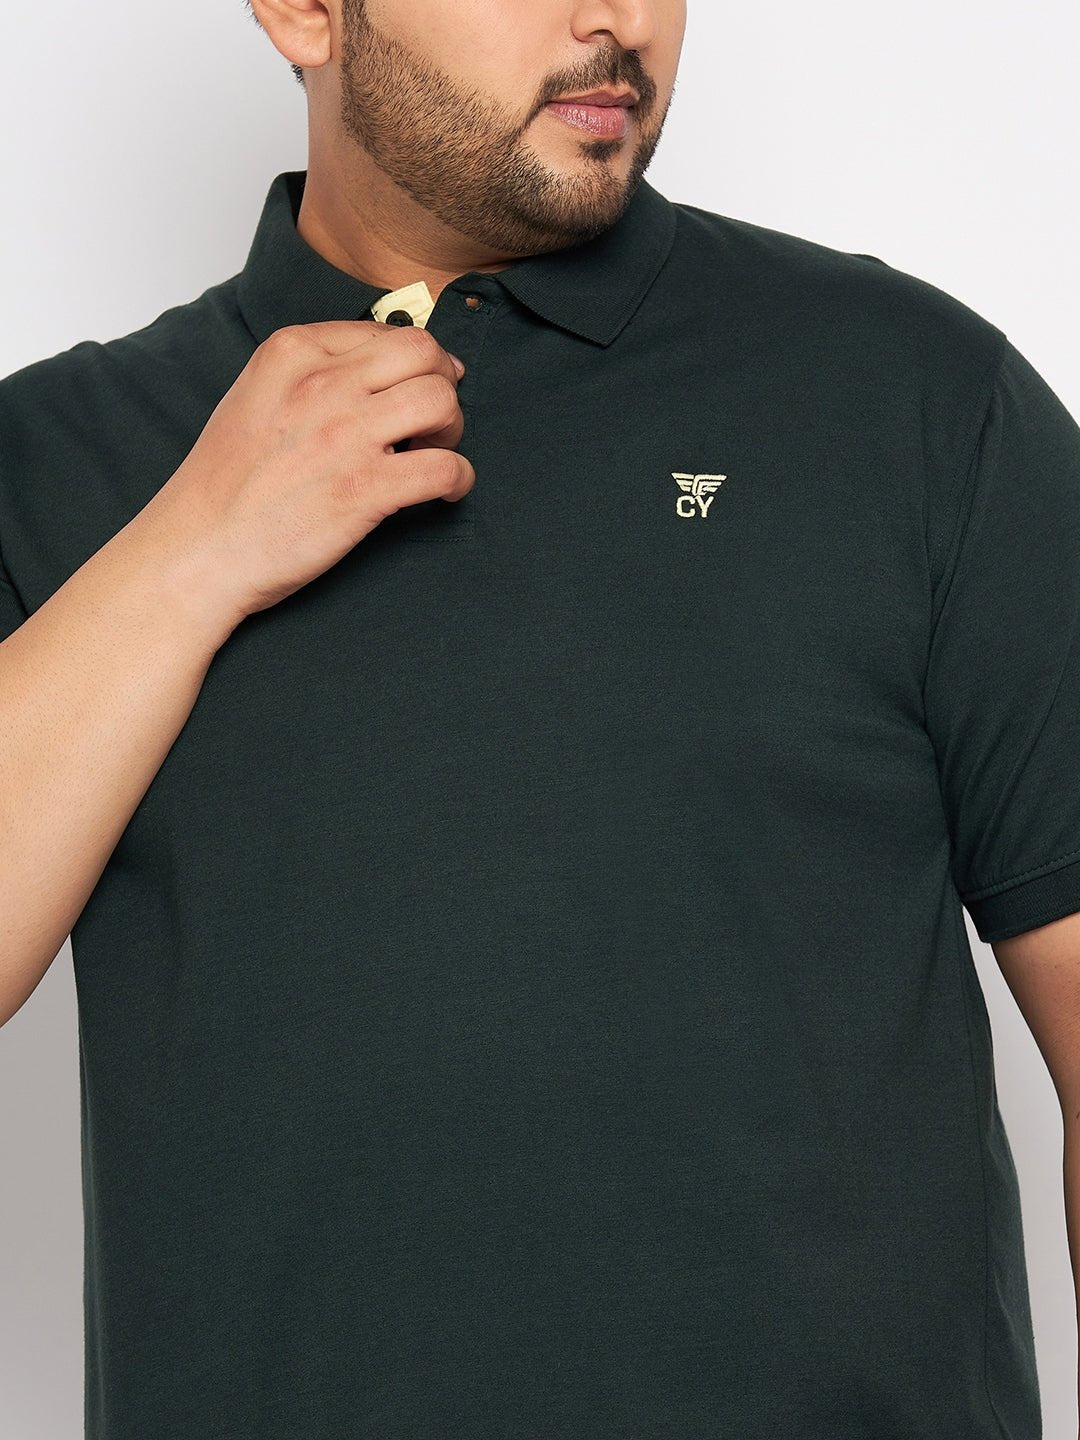 Plus Size Olive Polo T-Shirt - clubyork